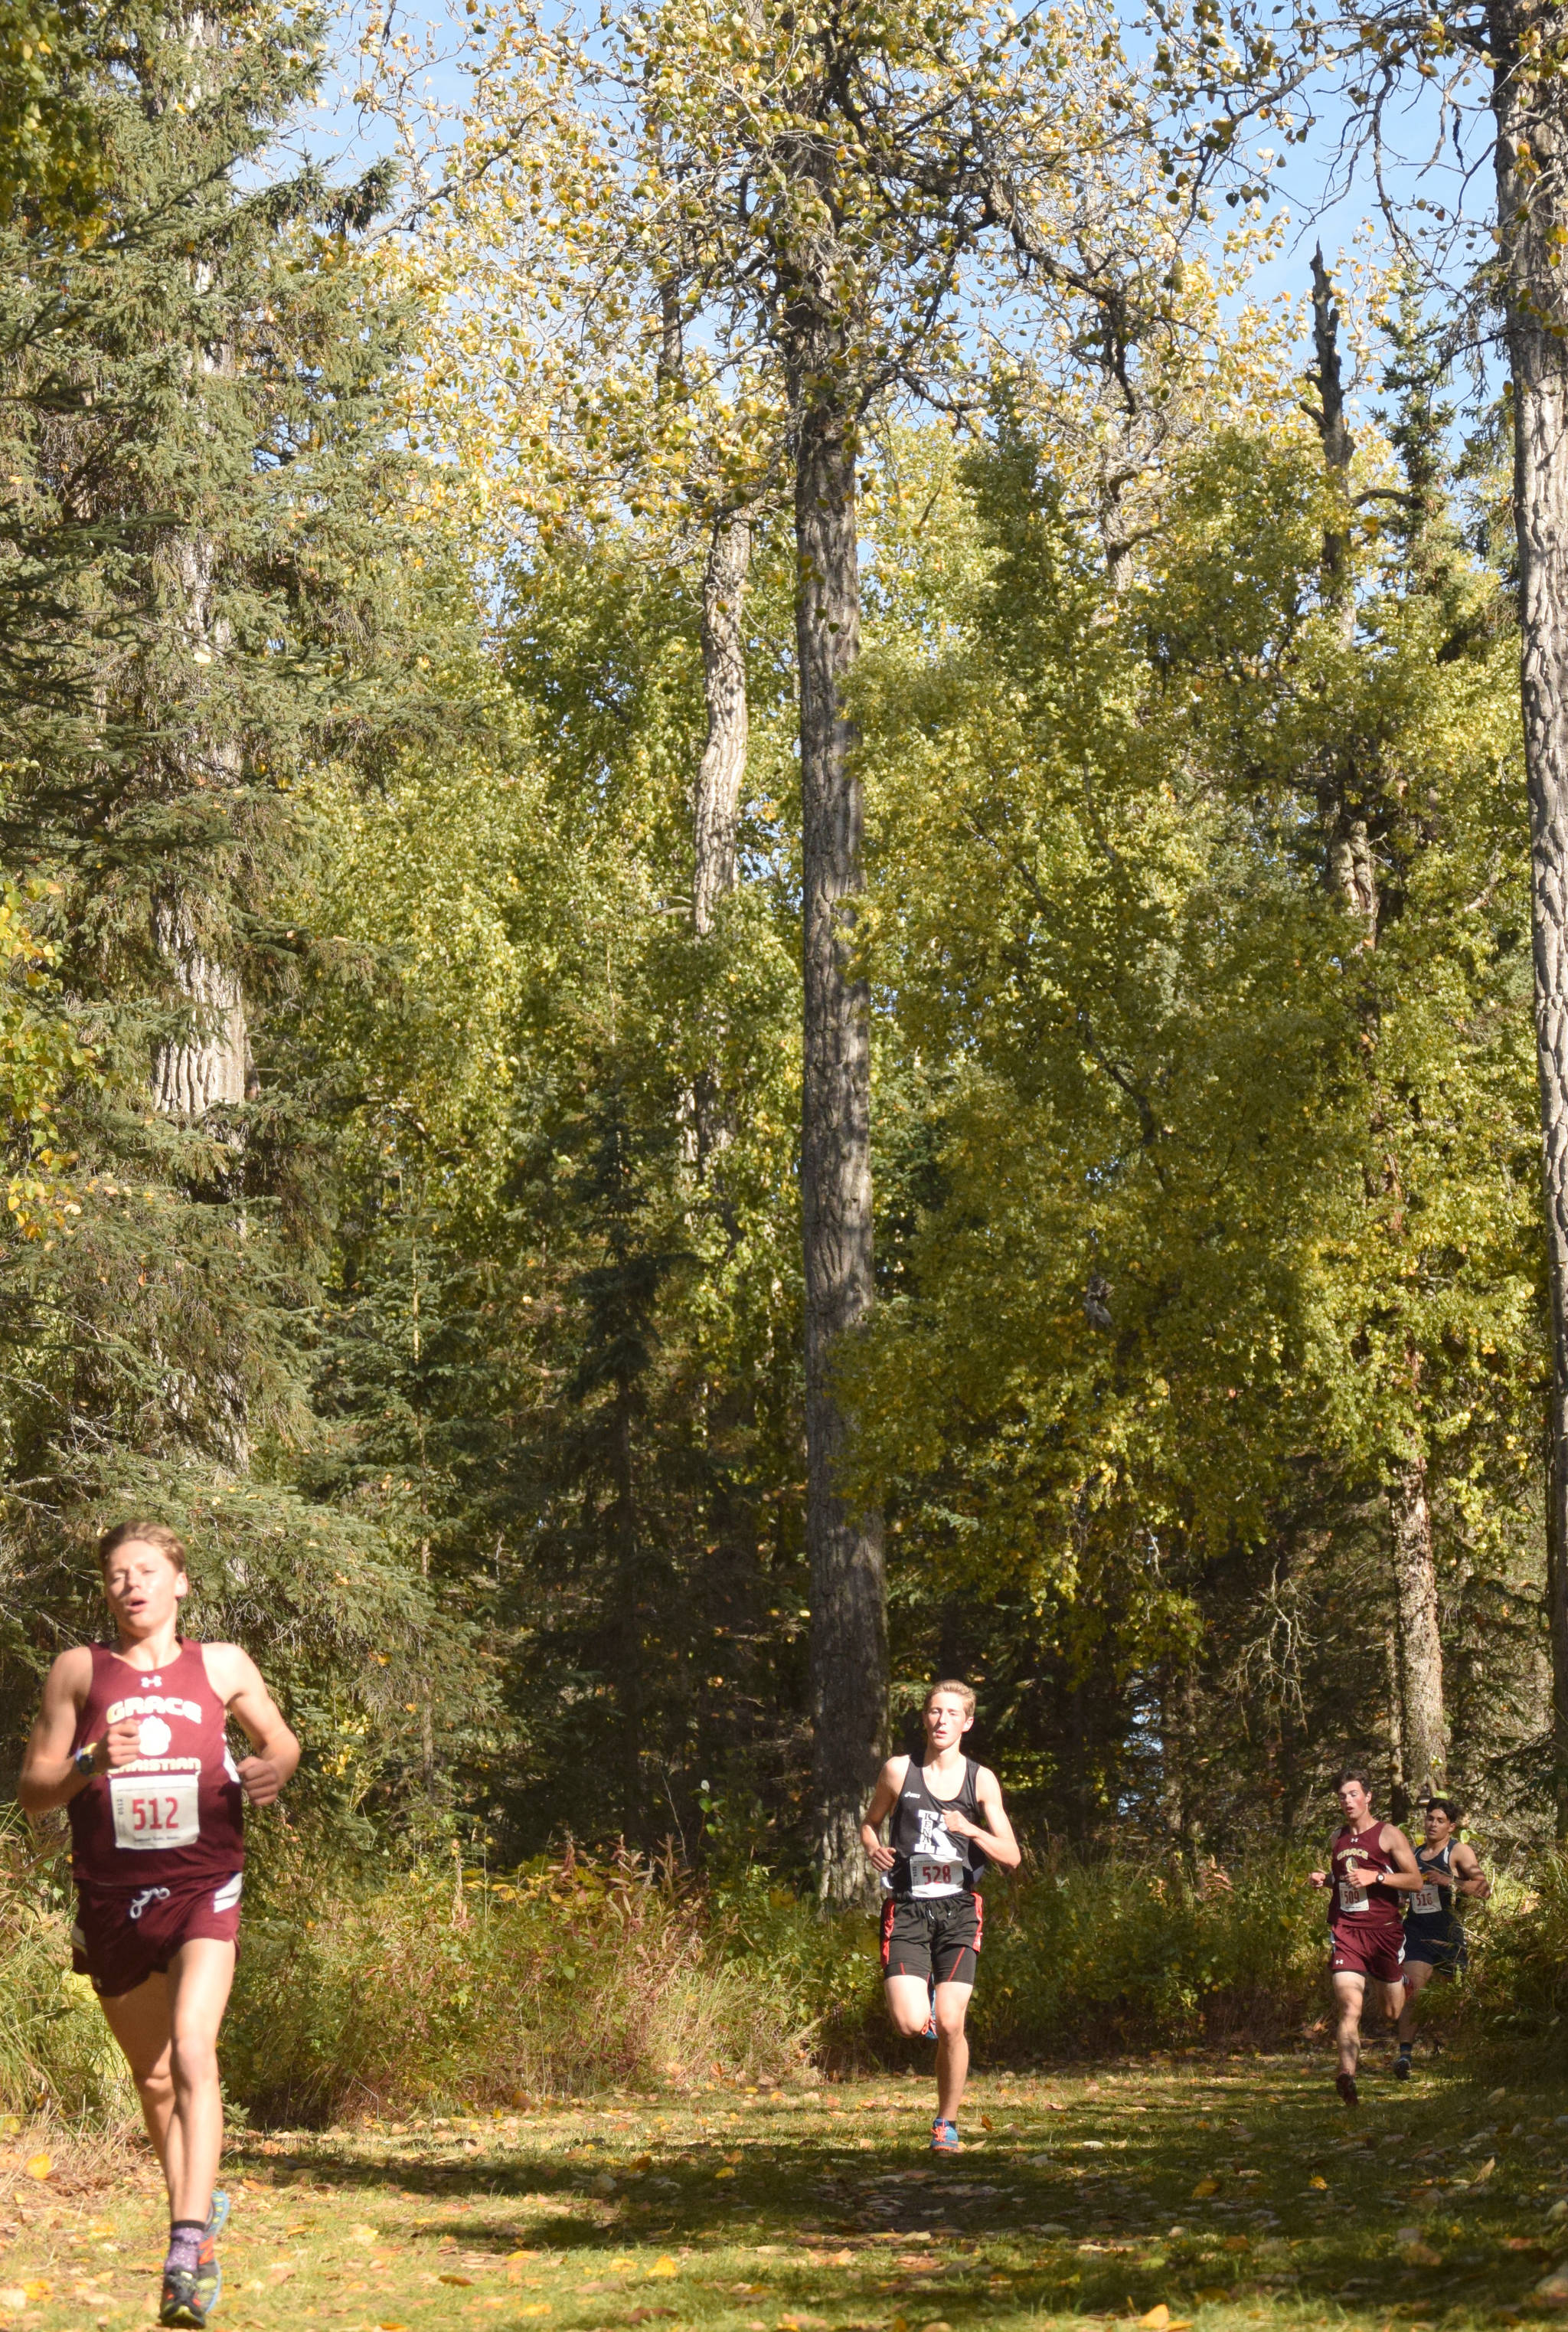 Grace Christian’s Gabe Martin leads Kenai Central’s Maison Dunham and the pack down a hill Saturday, Sept. 22, 2018, in the Division II race at the Region 3 meet at Tsalteshi Trails. (Photo by Jeff Helminiak/Peninsula Clarion)